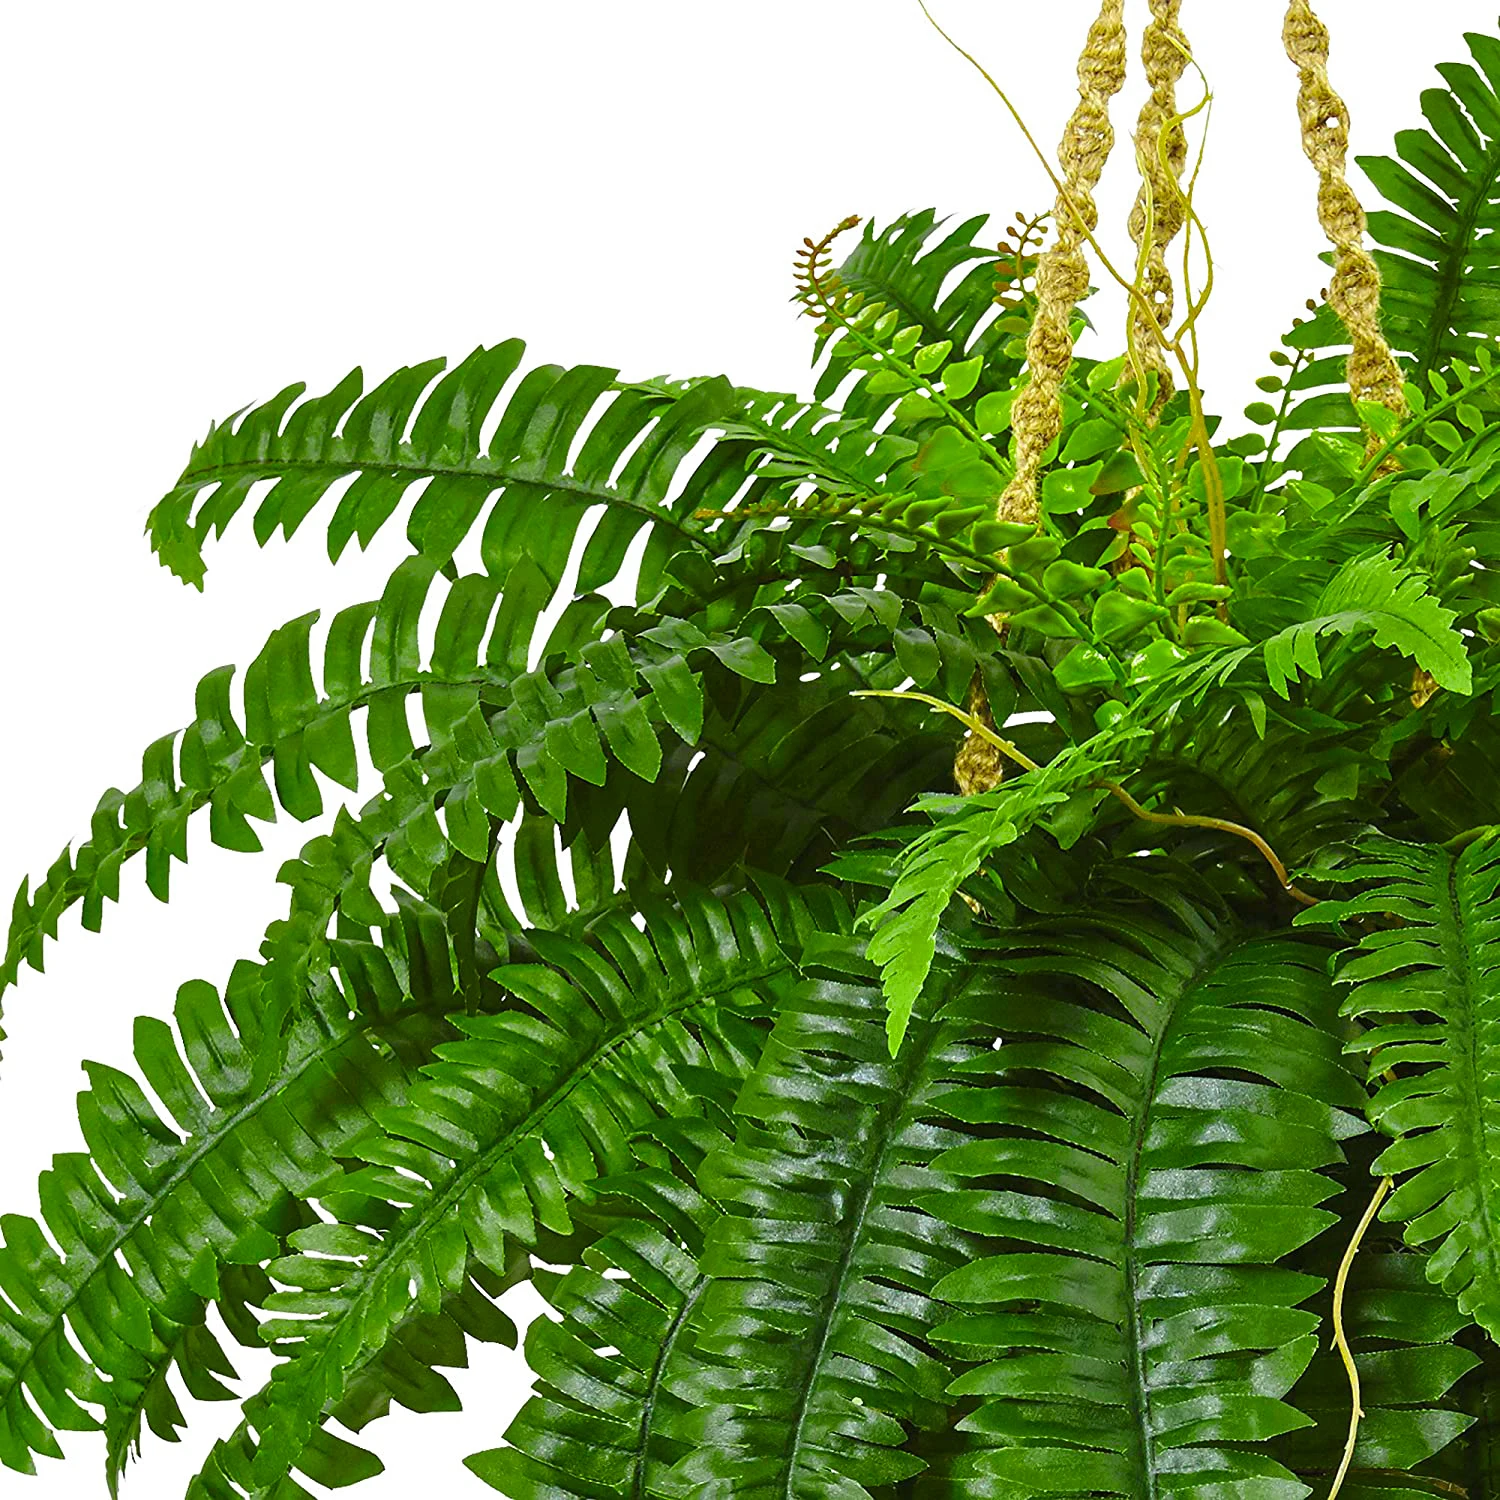 

Artificial Boston Fern Plants Bushes Faux Plants Shrubs Greenery UV Resistant for House Office Garden Indoor Outdoor Décor